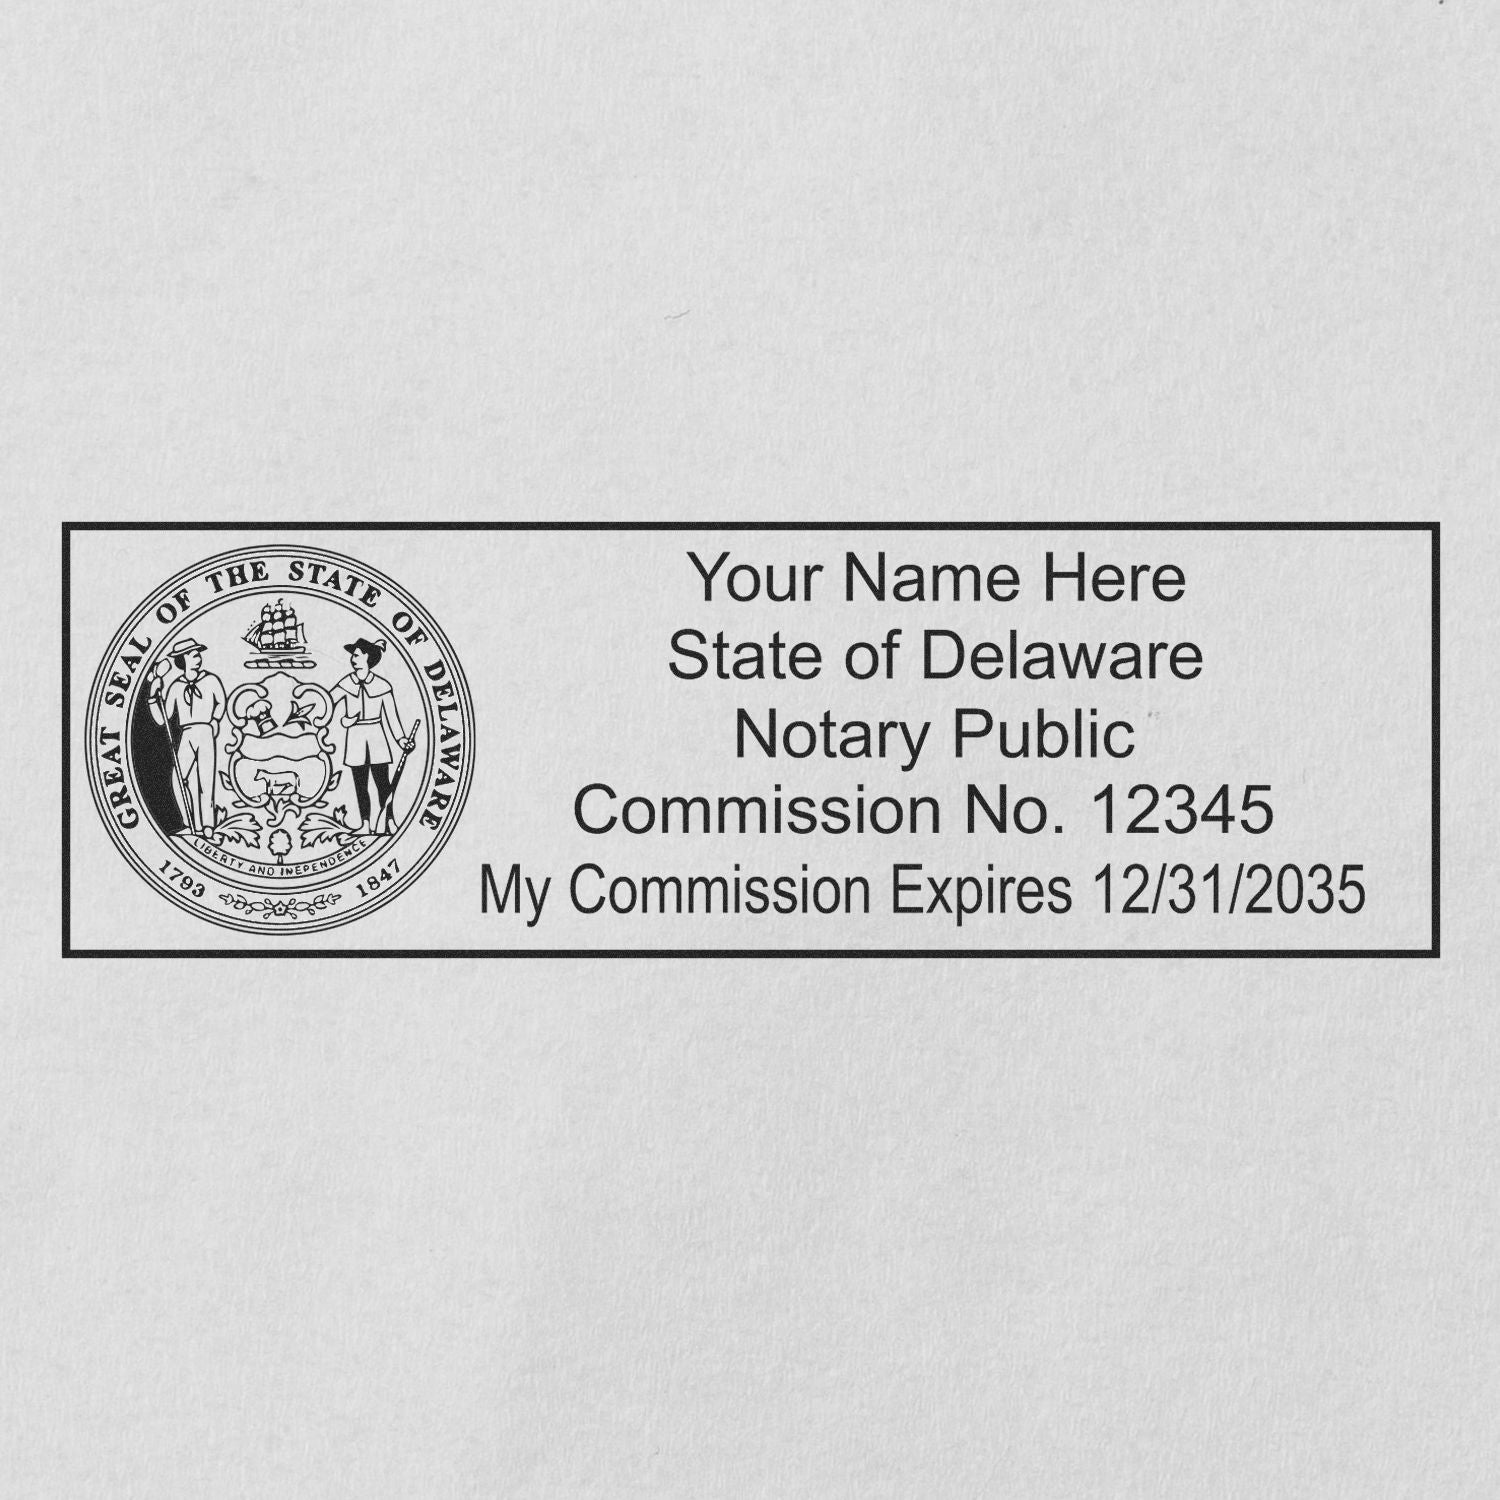 This paper is stamped with a sample imprint of the Slim Pre-Inked State Seal Notary Stamp for Delaware, signifying its quality and reliability.